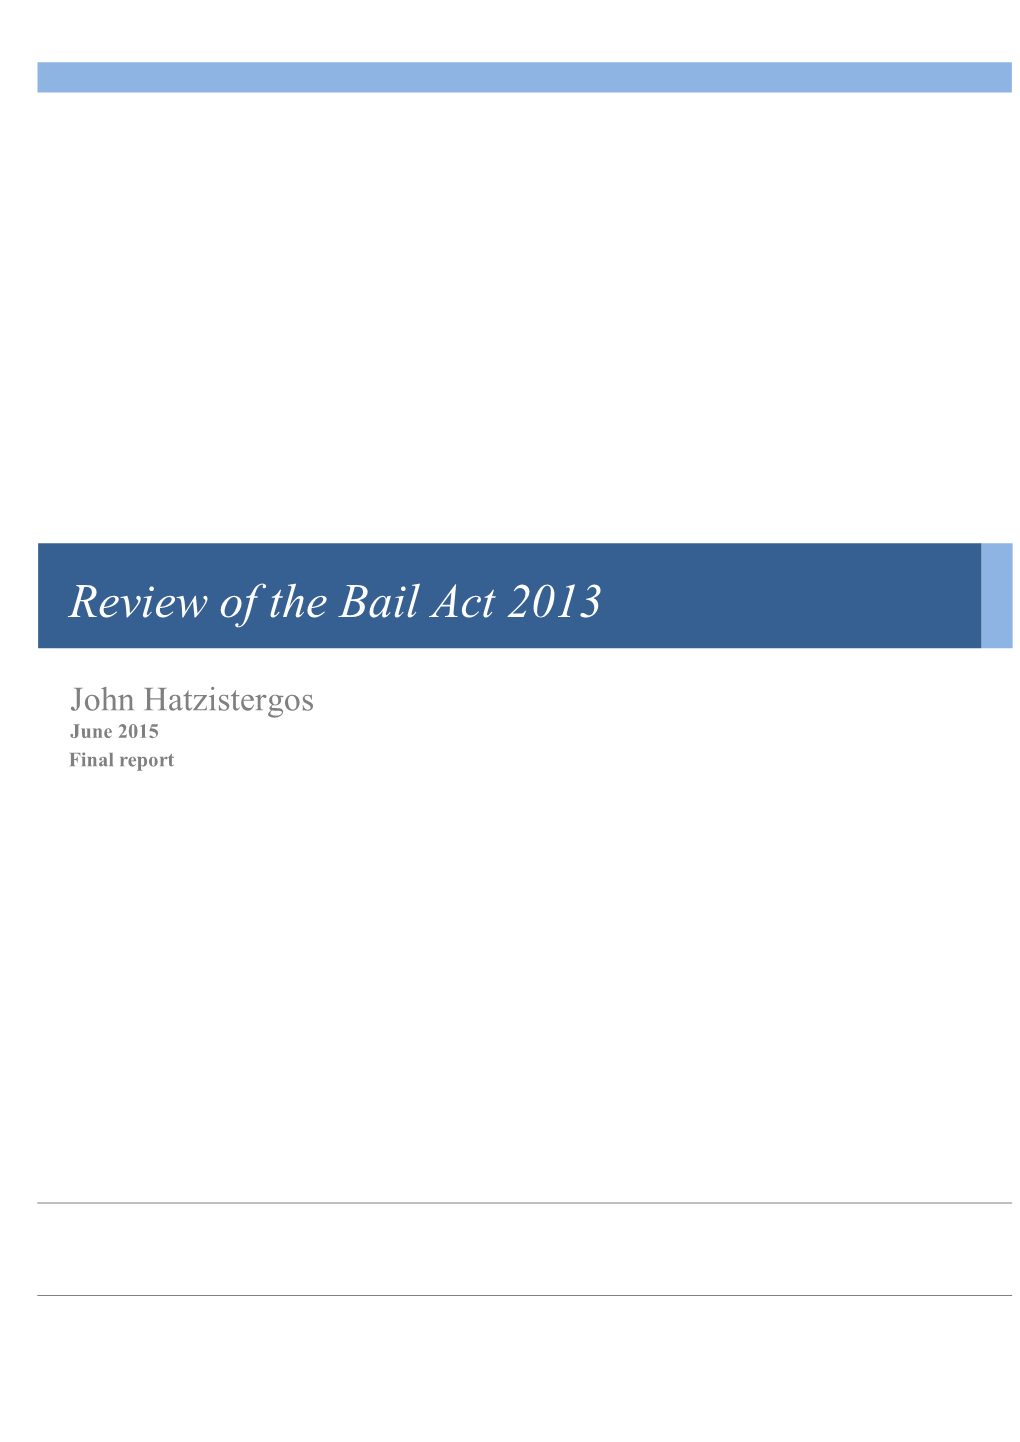 Review of the Bail Act 2013 Final Report